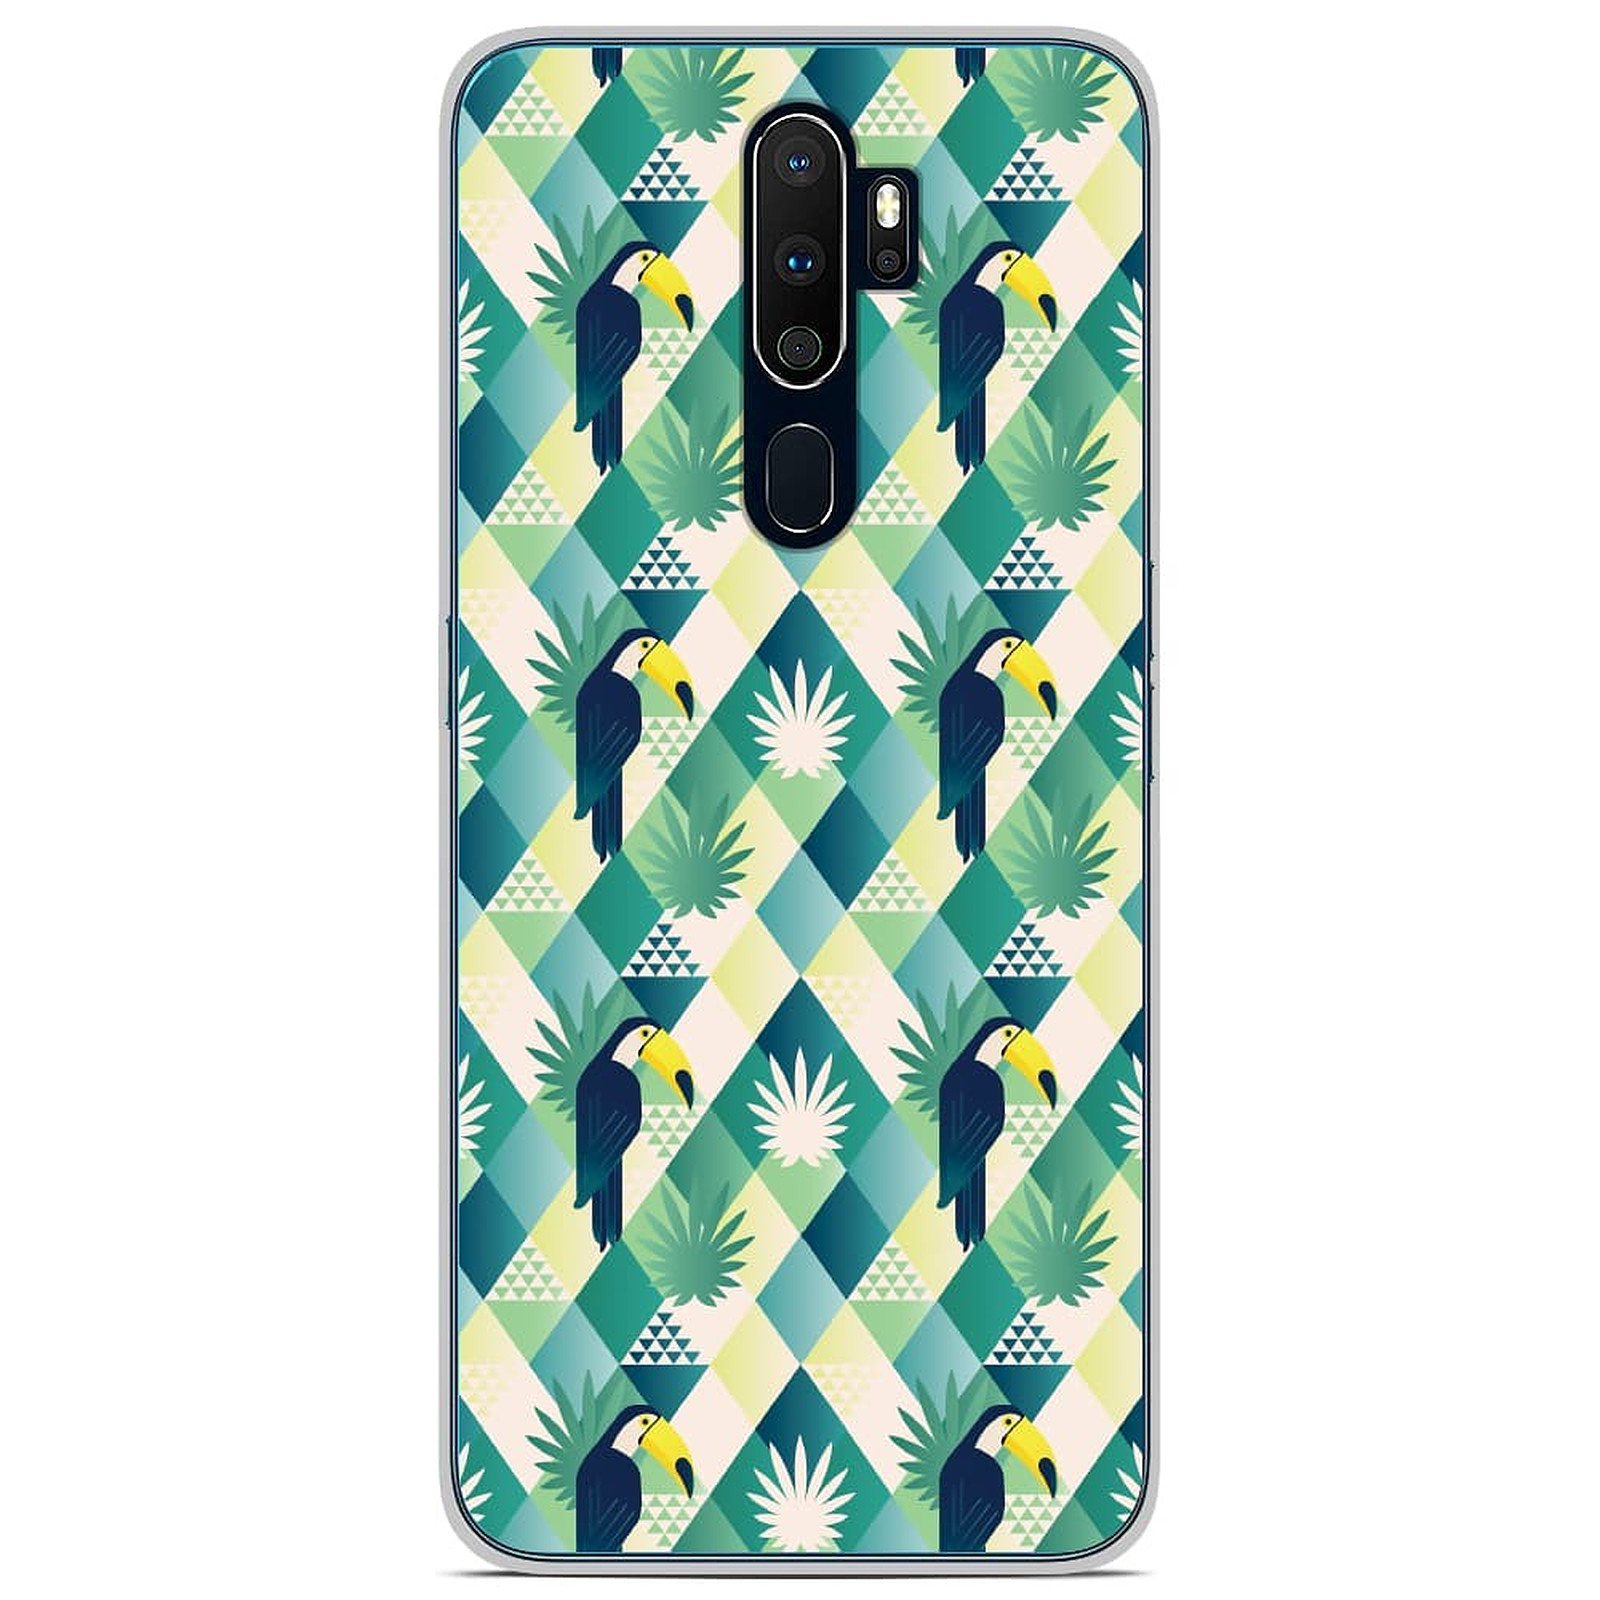 1001 Coques Coque silicone gel Oppo A5 2020 motif Toucan losange - Coque telephone 1001Coques